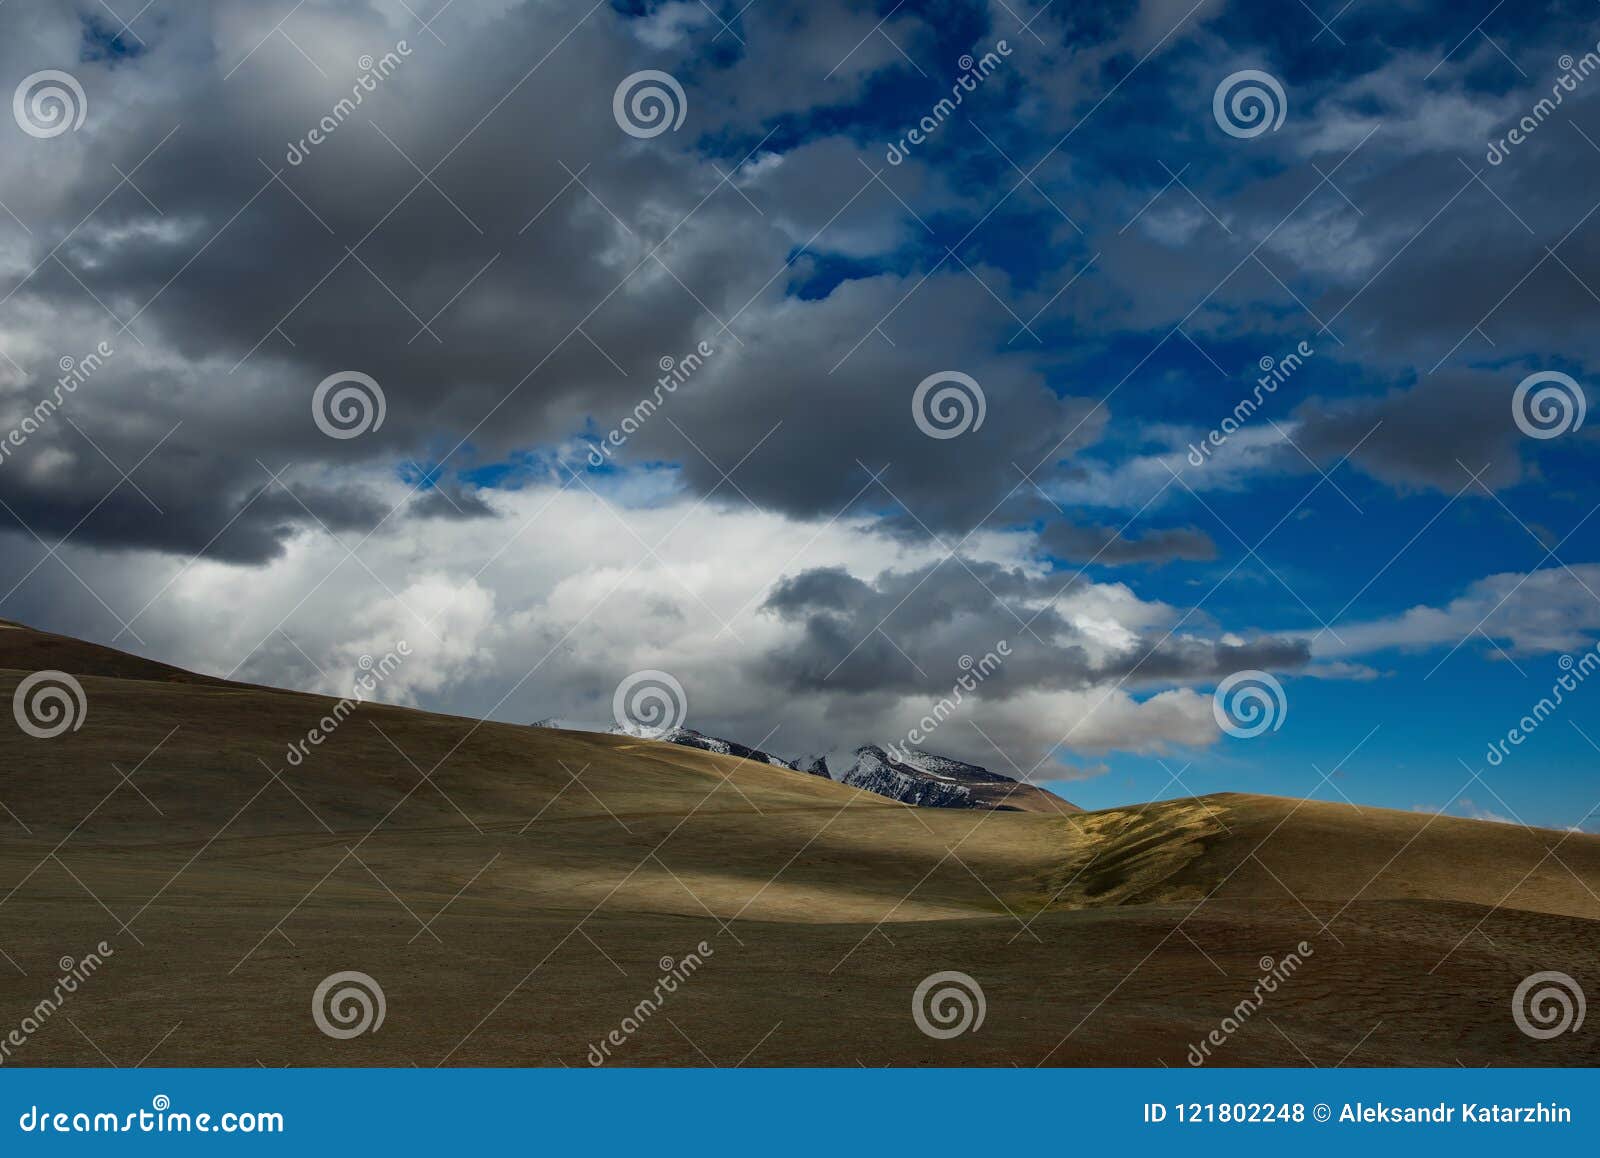 the endless steppe